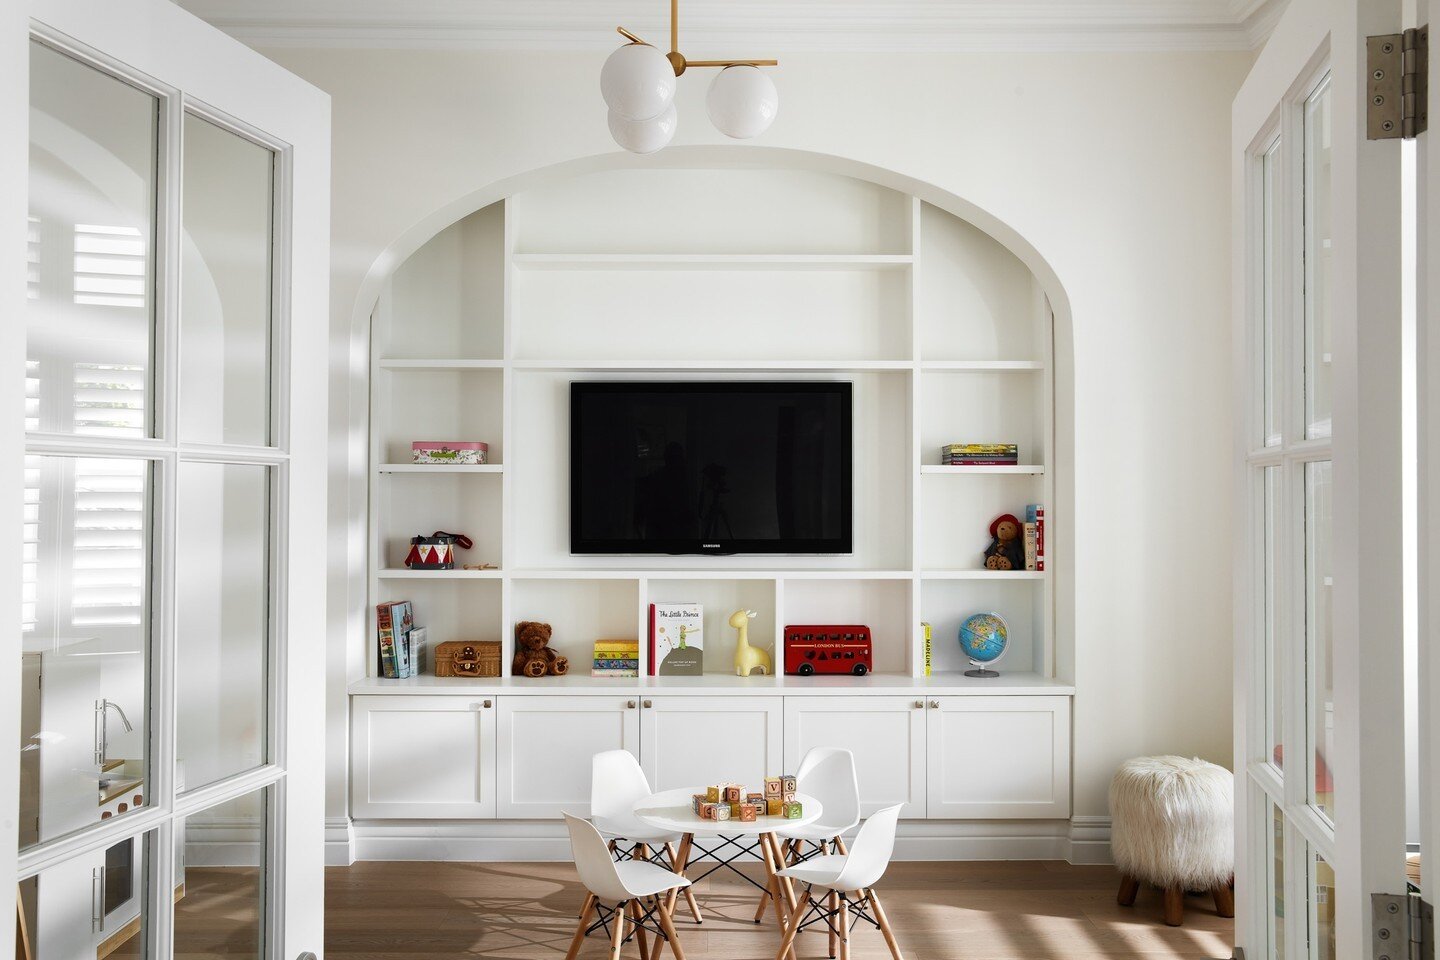 The cutest playroom around! Our built-in cabinetry encased within an existing arch features an abundance of (toys!) storage. ⁠
⁠
Design @march_twice_interiors⁠
Build @built.by.dezign⁠
Joinery @janzdesigns⁠
Photography @ryanlphoto